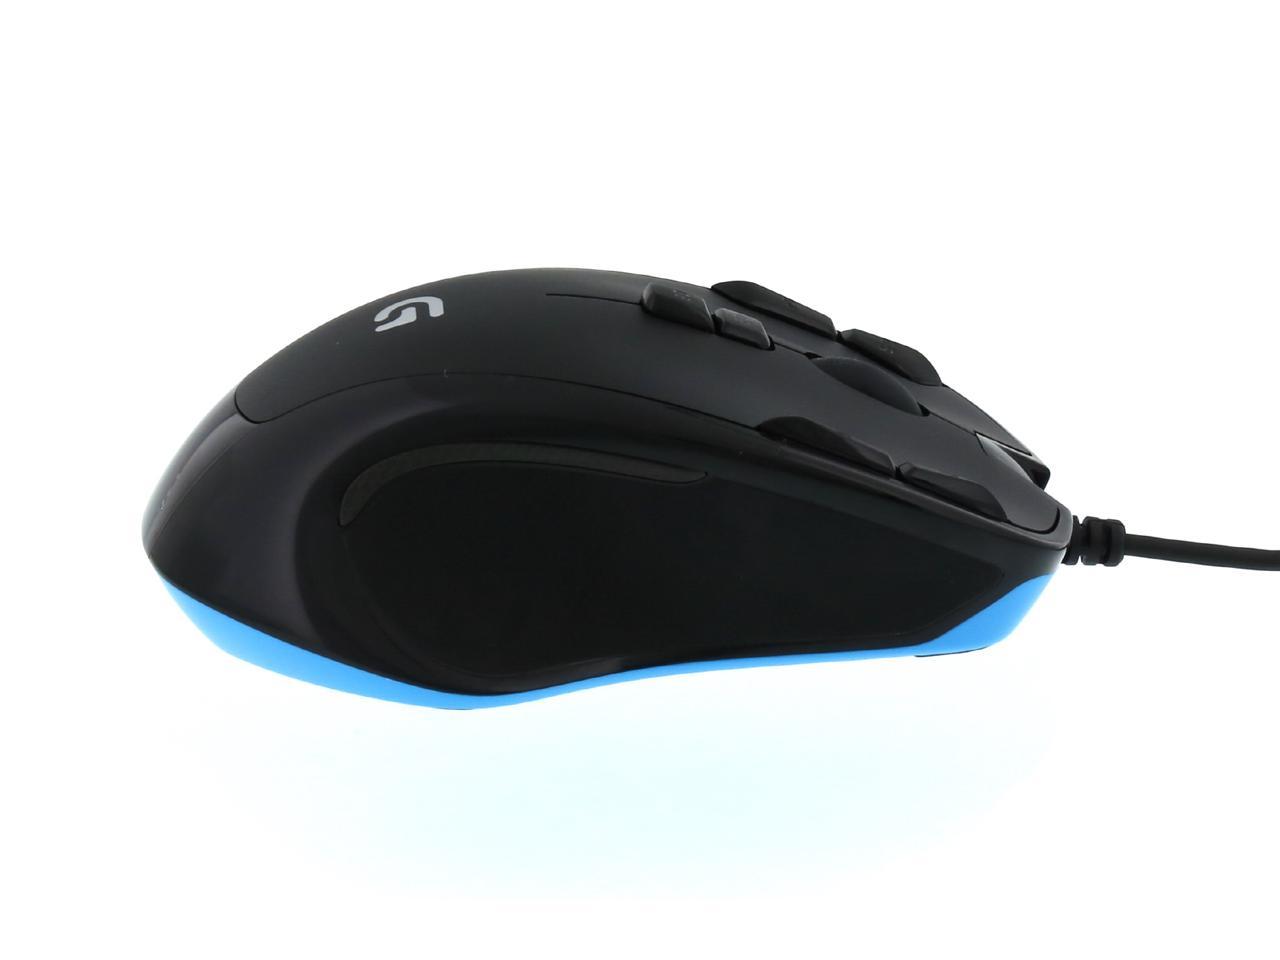 Logitech G300s Optical Ambidextrous Gaming Mouse – 9 Programmable